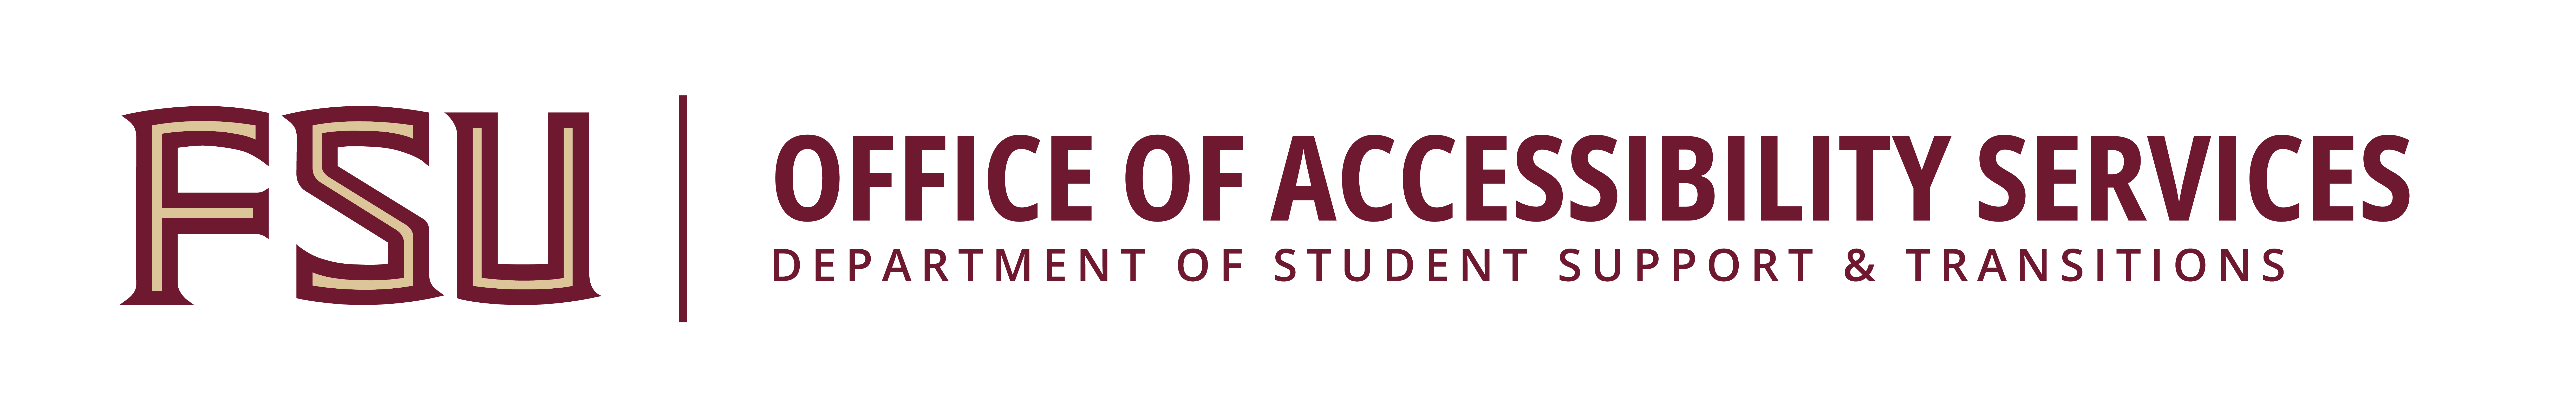 Florida State University Office of Accessibility Services Department of Student Support and Transitions